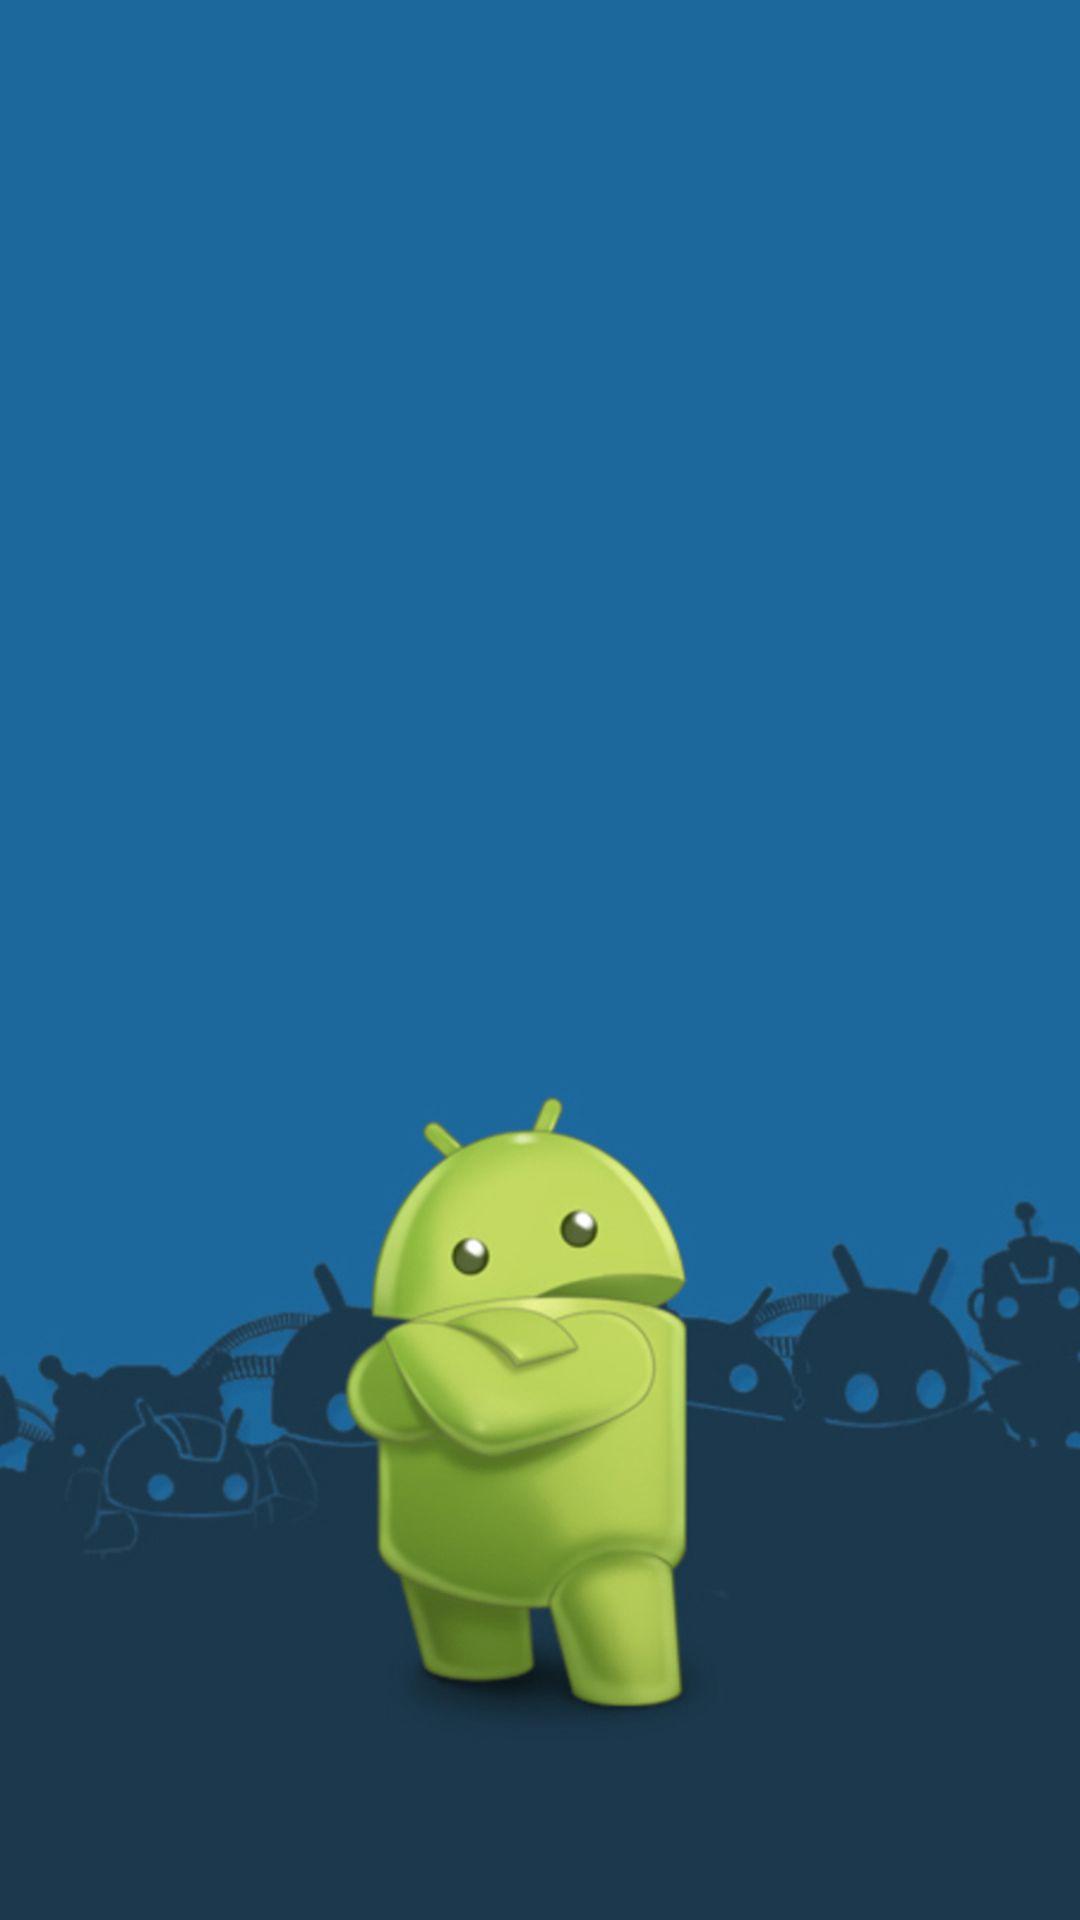 Cool Samsung Logo - Cool Android Logo Android Wallpaper free download